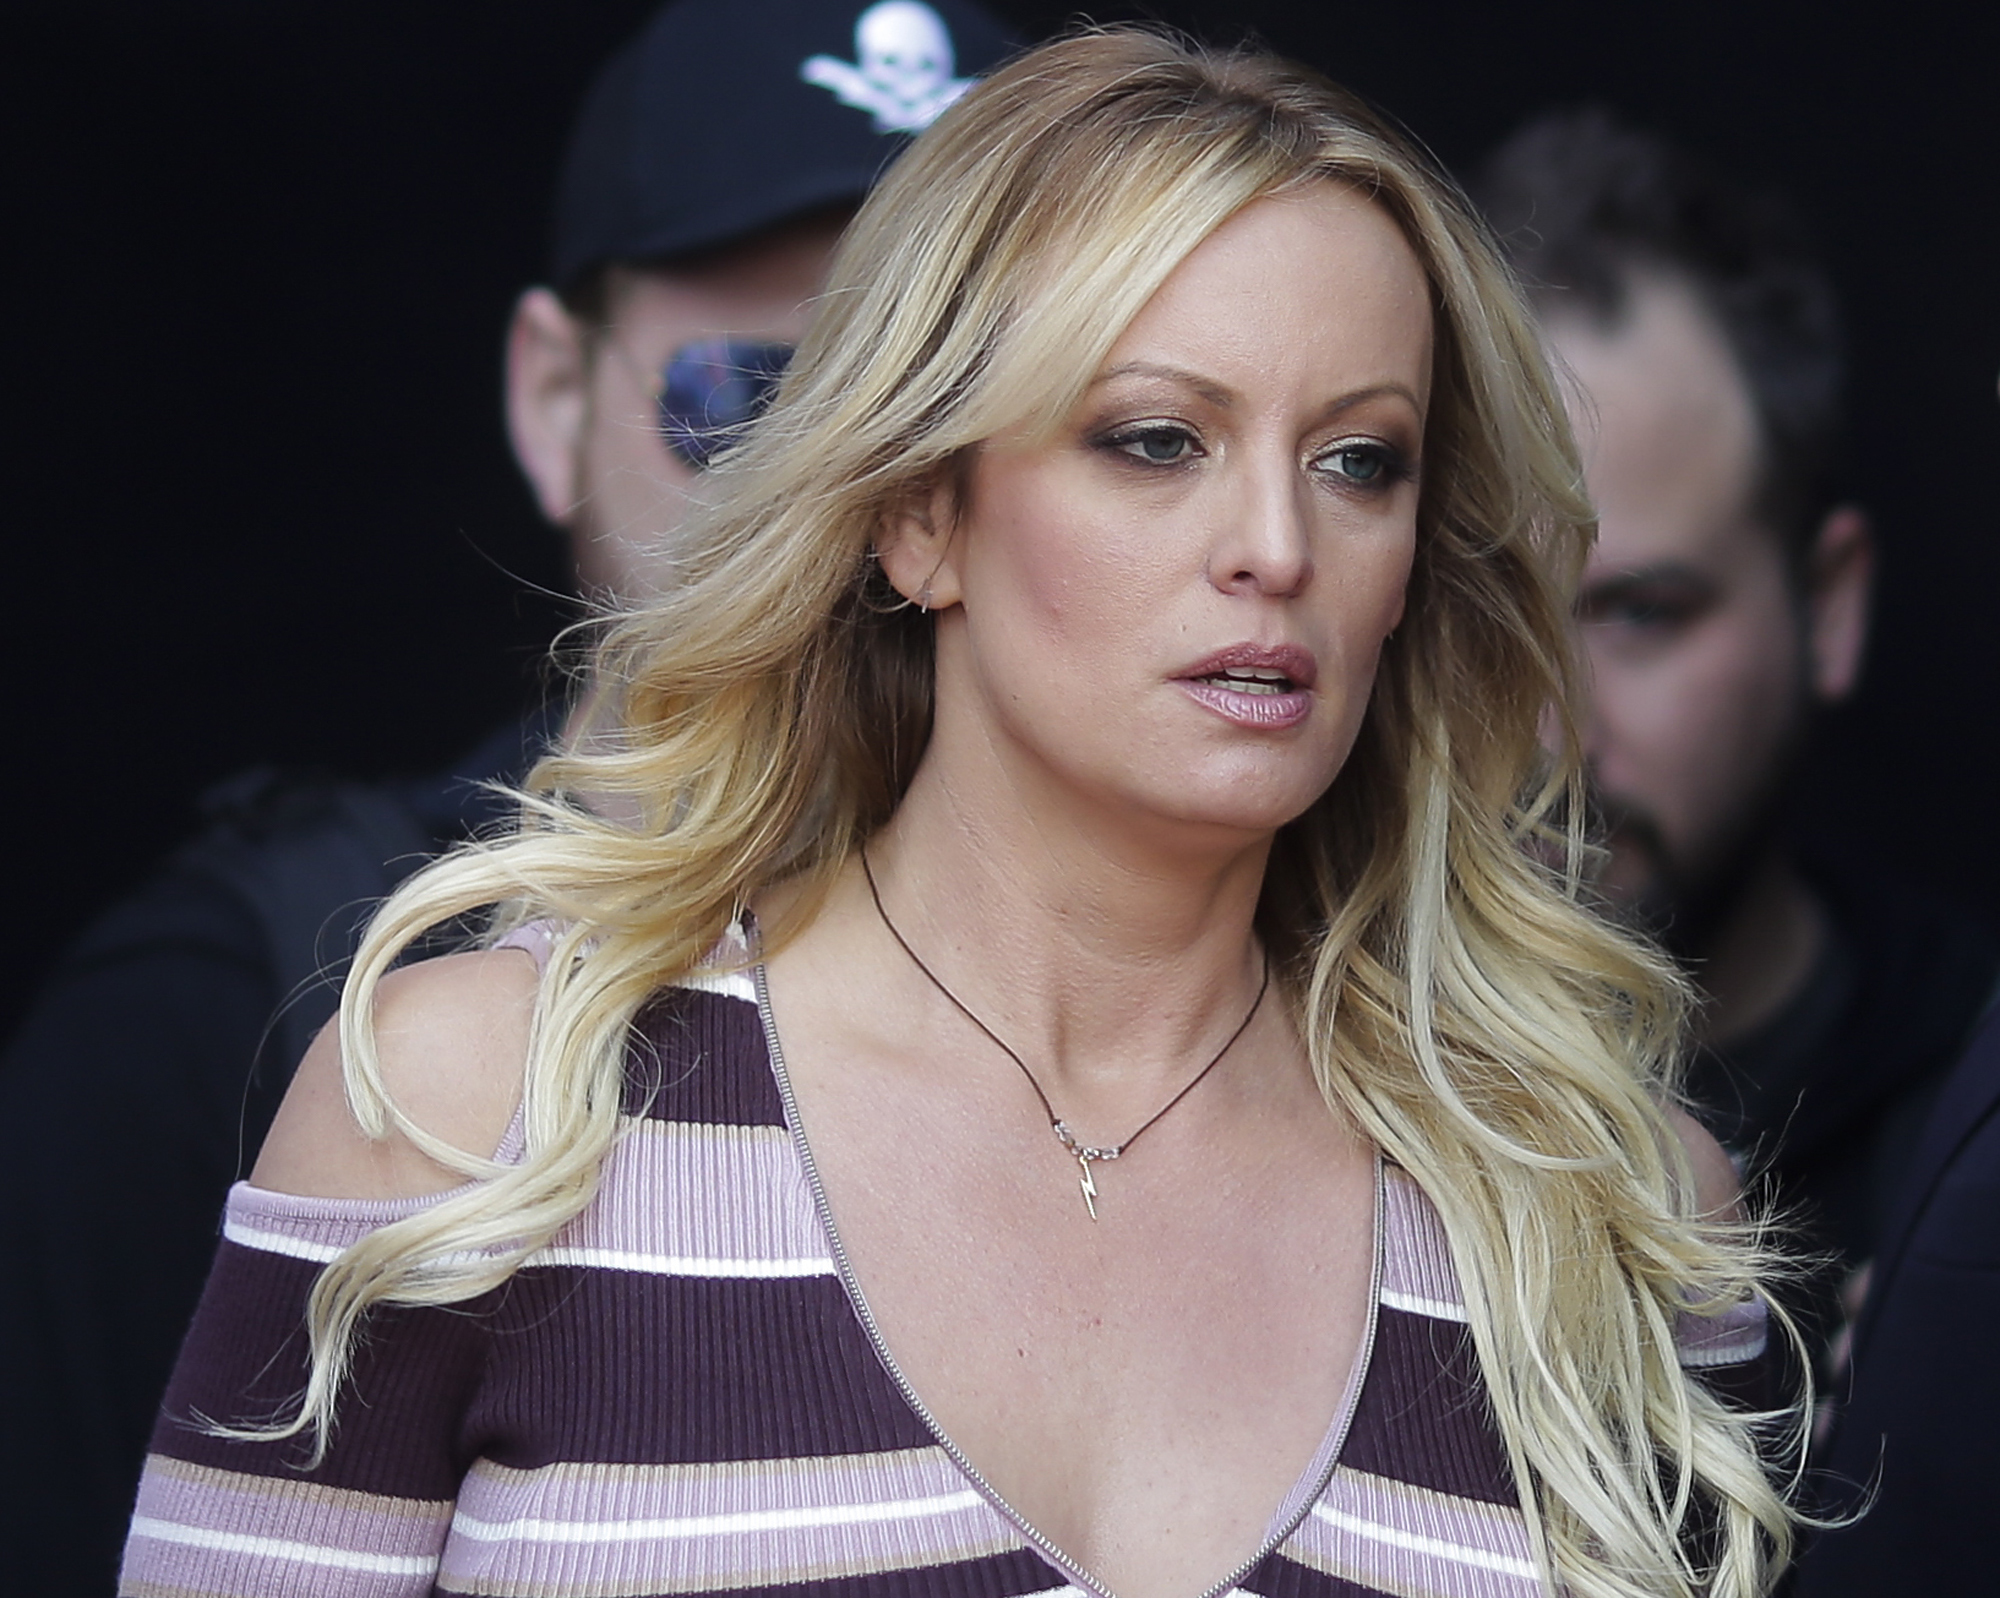 PHOTO: Adult film actress Stormy Daniels arrives for the opening of the adult entertainment fair "Venus" in Berlin, Oct. 11, 2018.